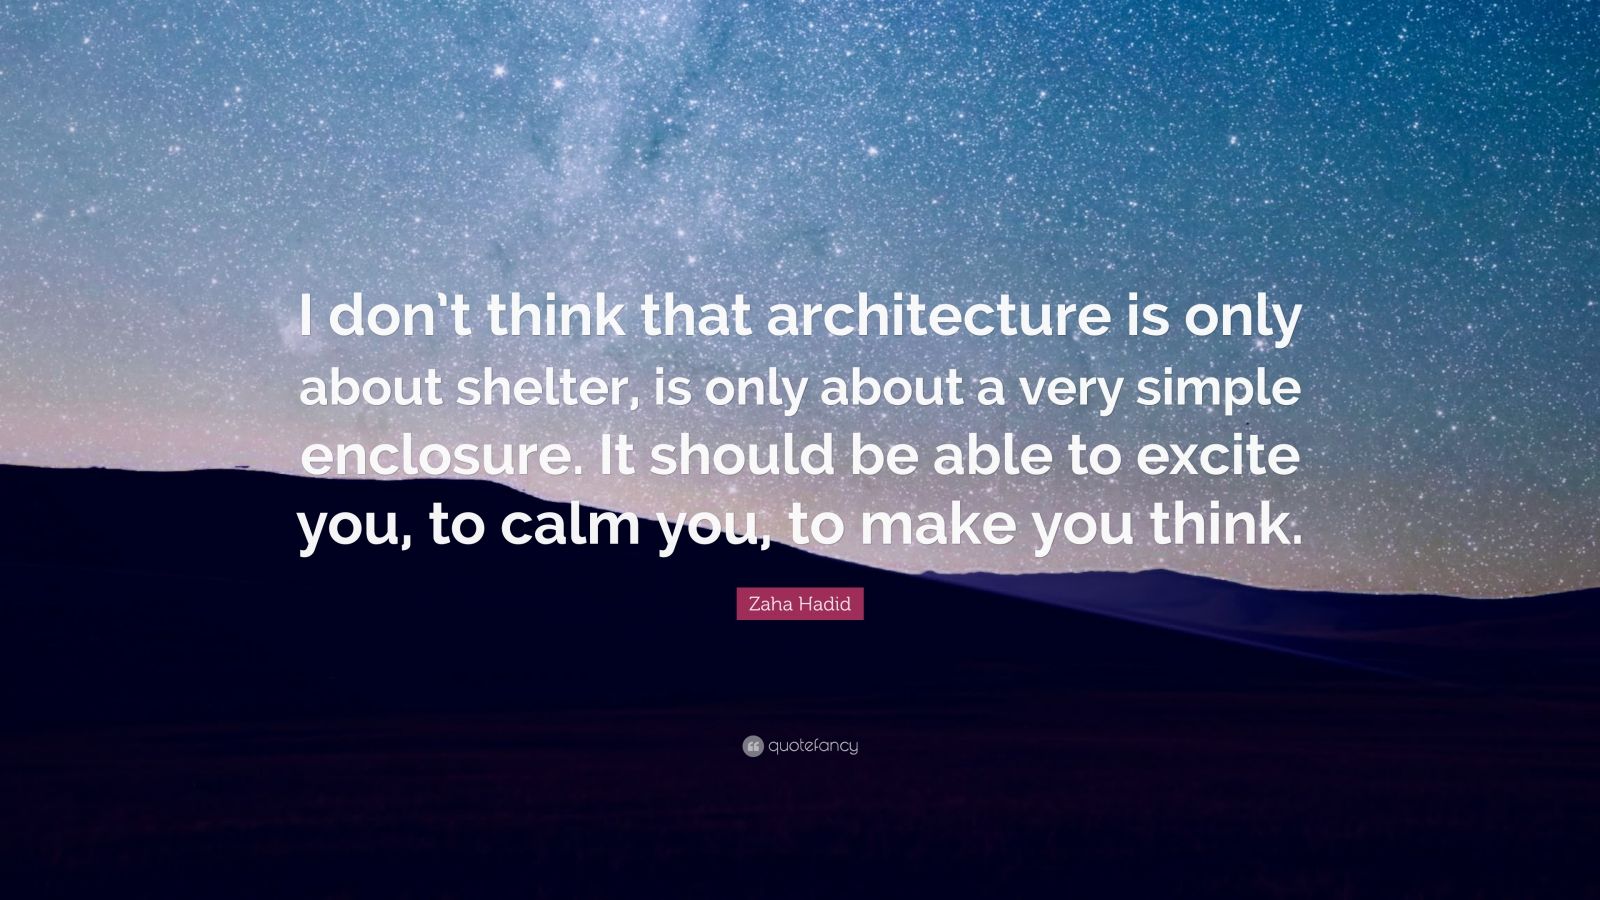 Zaha Hadid Quote: “I don’t think that architecture is only about ...